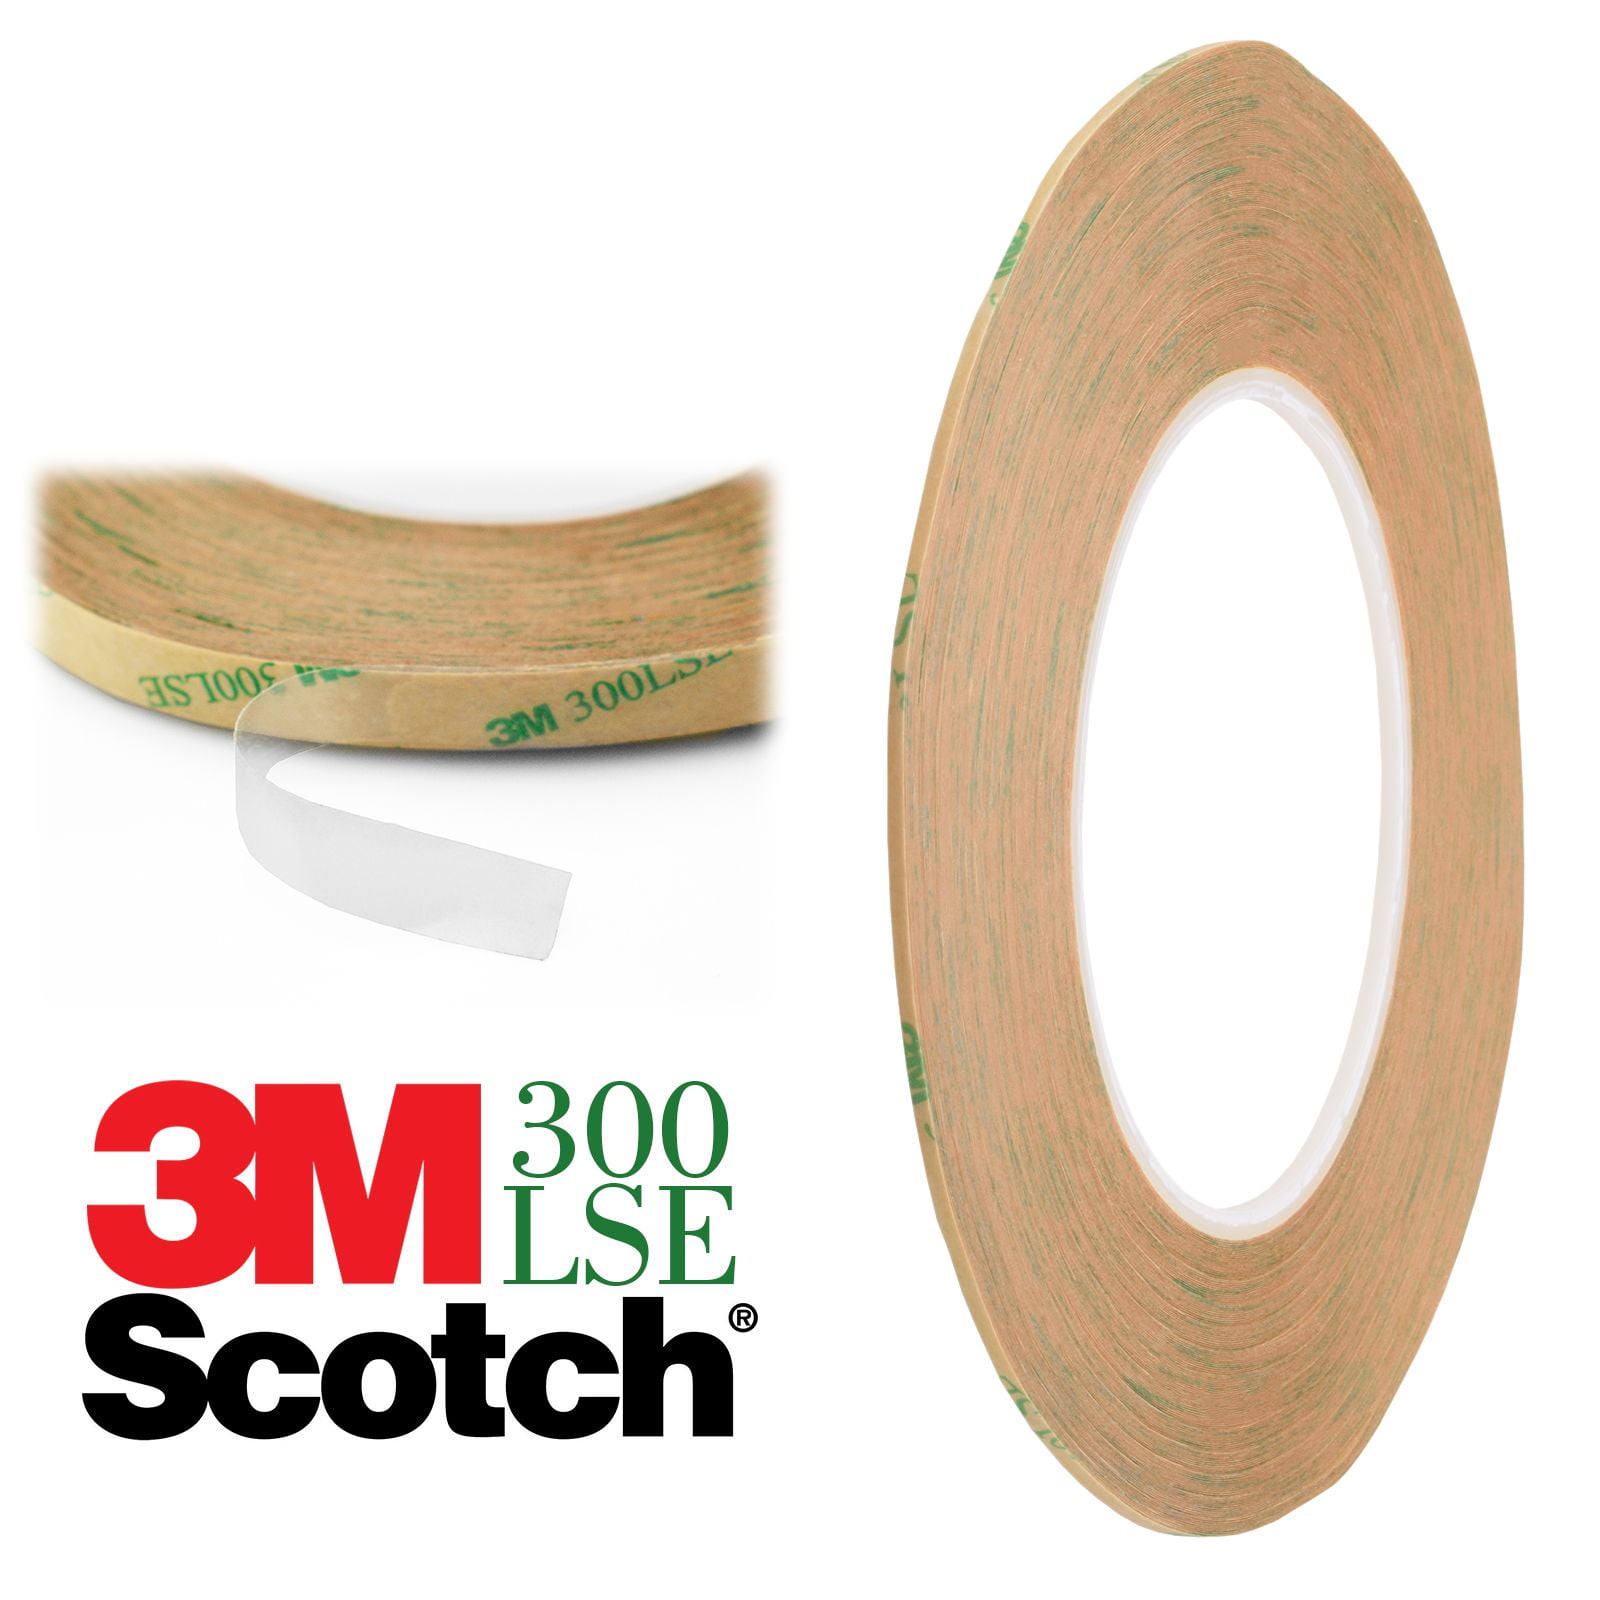 2x 3/4" Wide Double Sided acrylic Foam High Strength Adhesive Tape 60 Foot Roll 